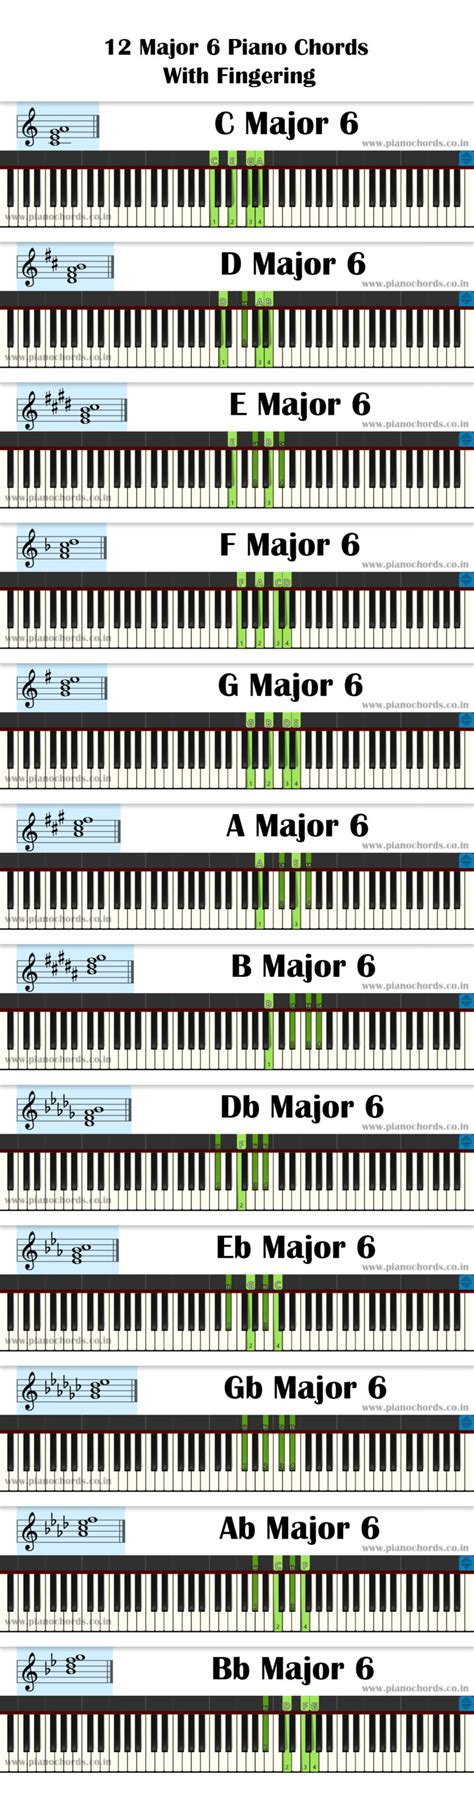 12 Major 6 Piano Chords With Fingering Diagram Staff Notation